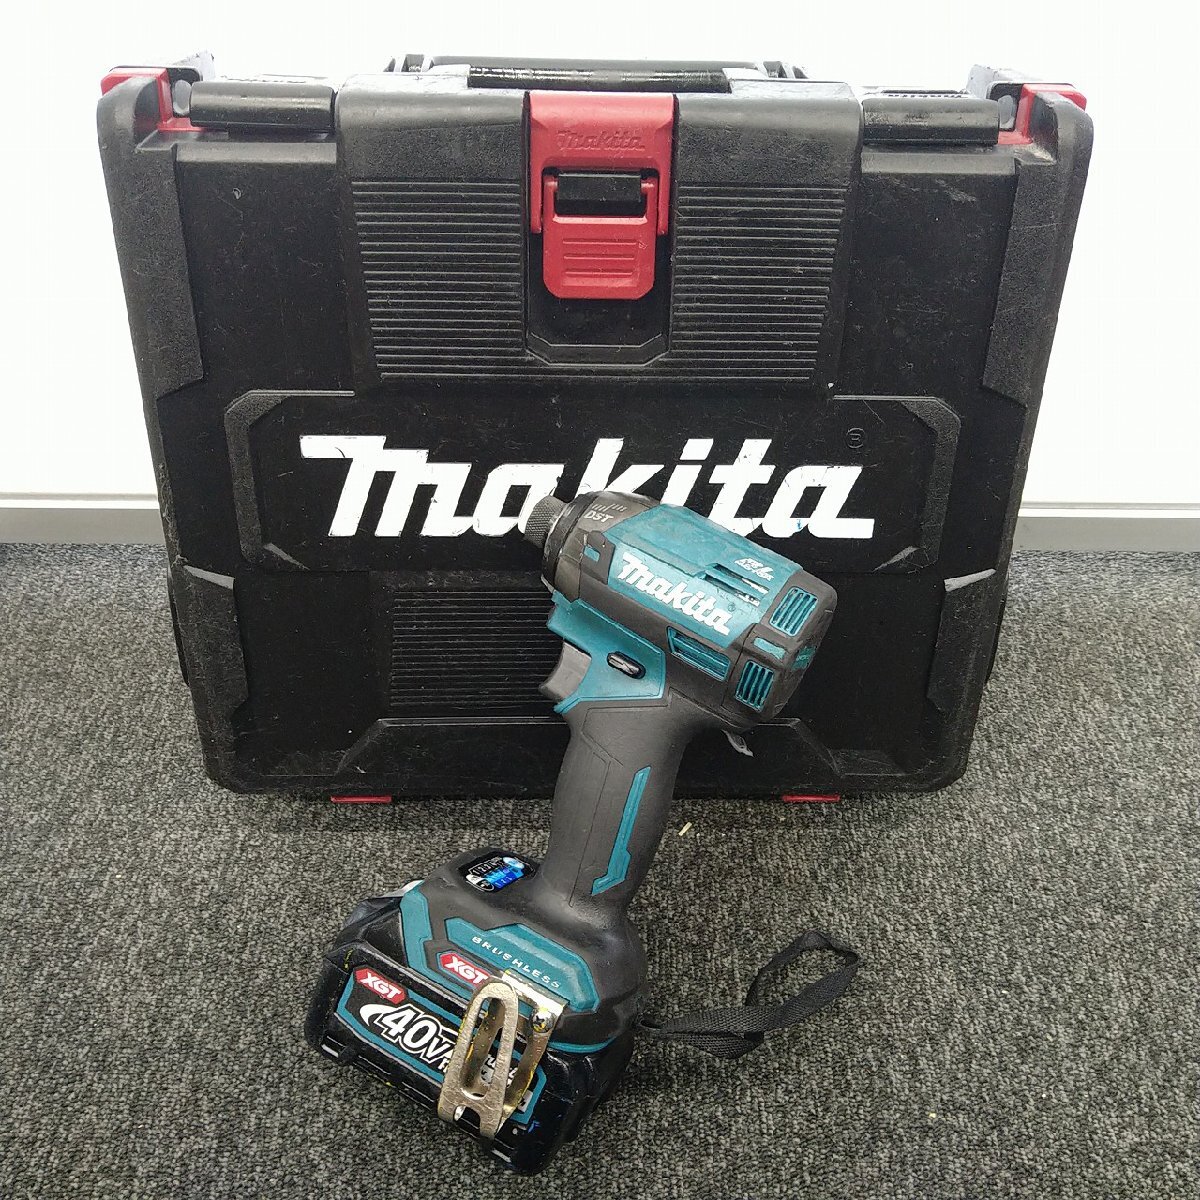 $[ Makita Makita 40Vmax rechargeable impact driver TD002GRDX blue battery 1 piece attaching in the case power tool ]KH11890